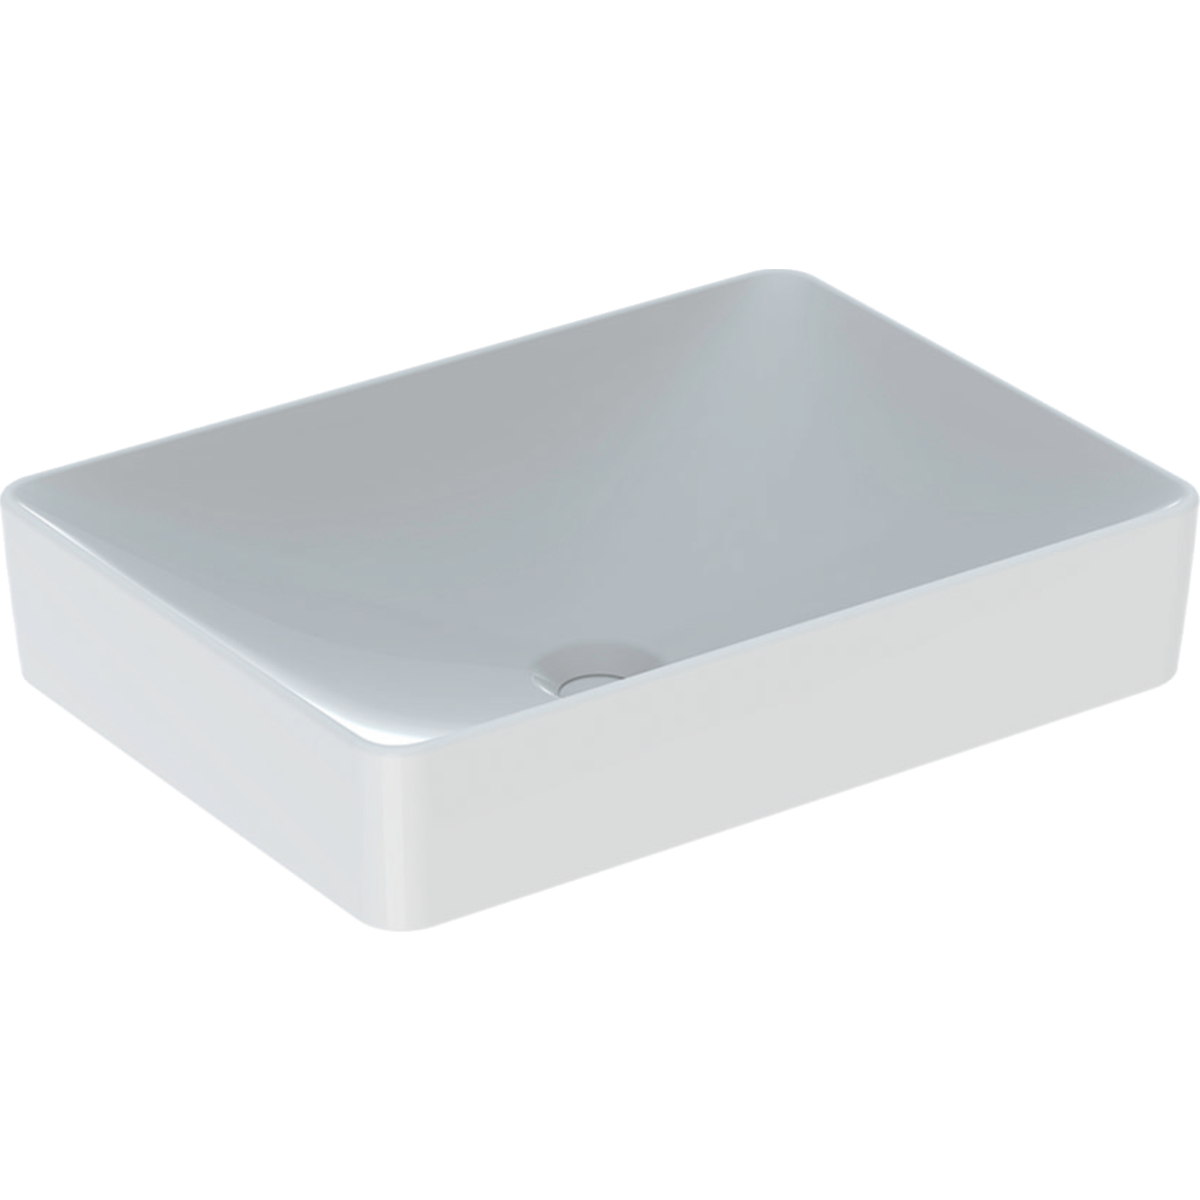 VariForm rectangular 55x40cm lay-on nth basin without overflow